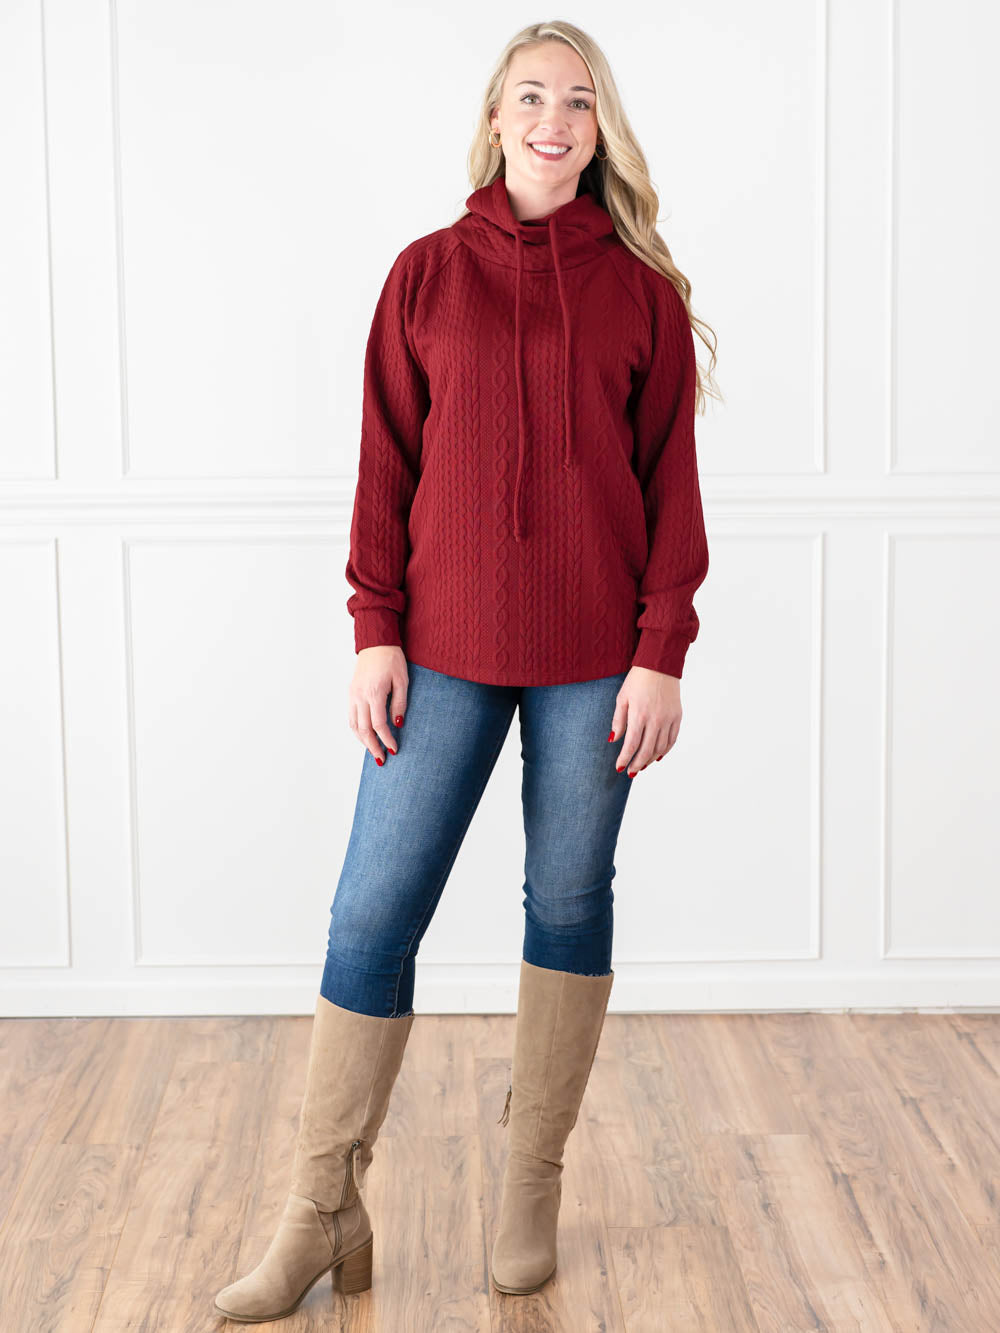 Cable Knit Sweatshirt for Tall Women